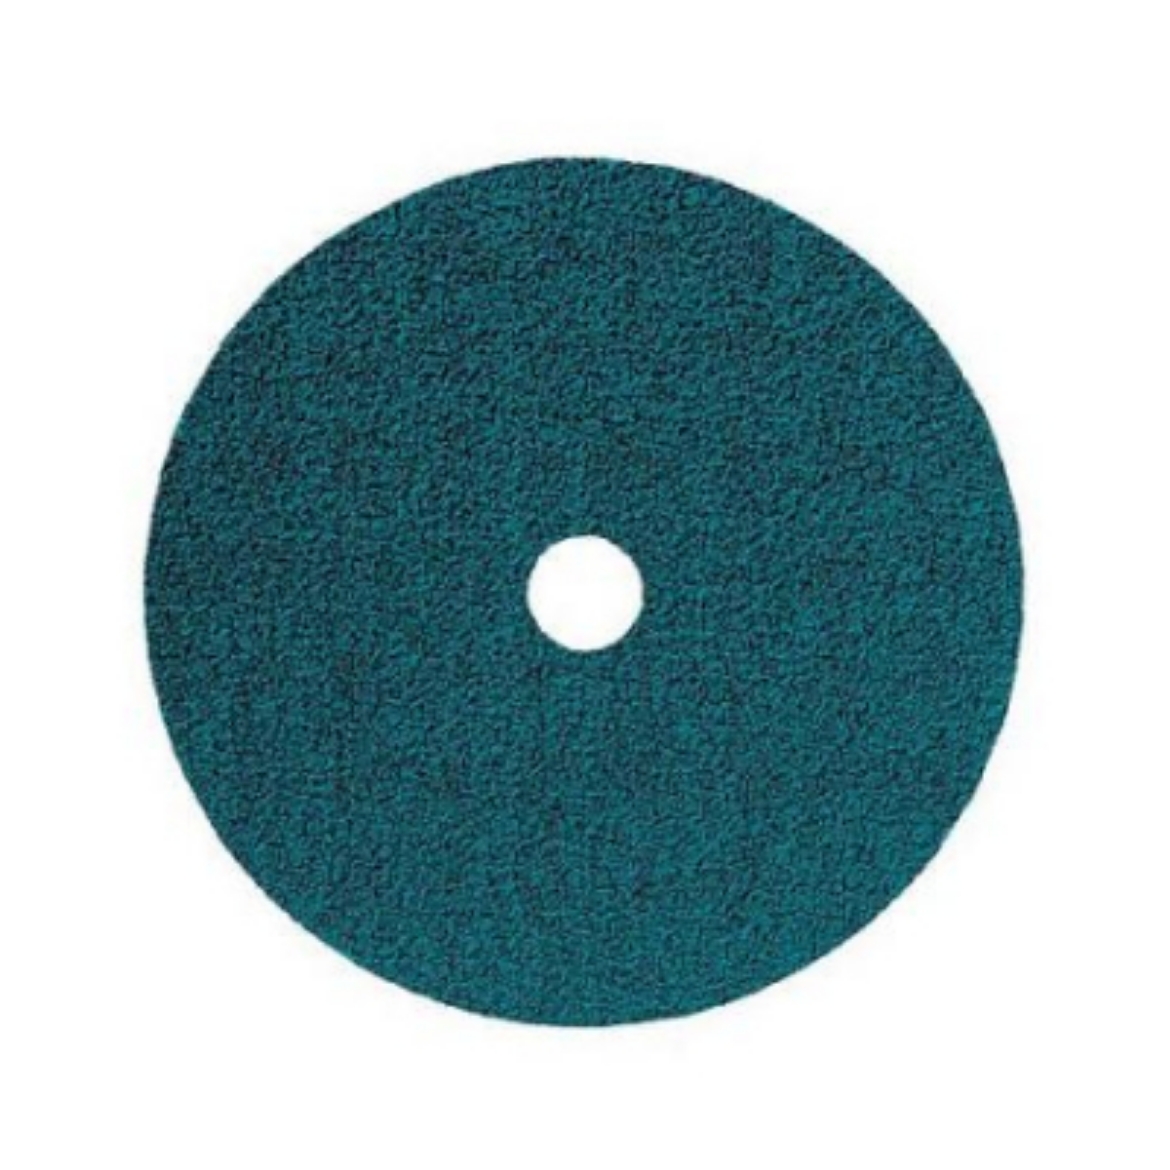 Picture of PFERD 7"X36G SA-FS 180-22 Z 36 UNSLOTTED RESIN FIBRE DISC